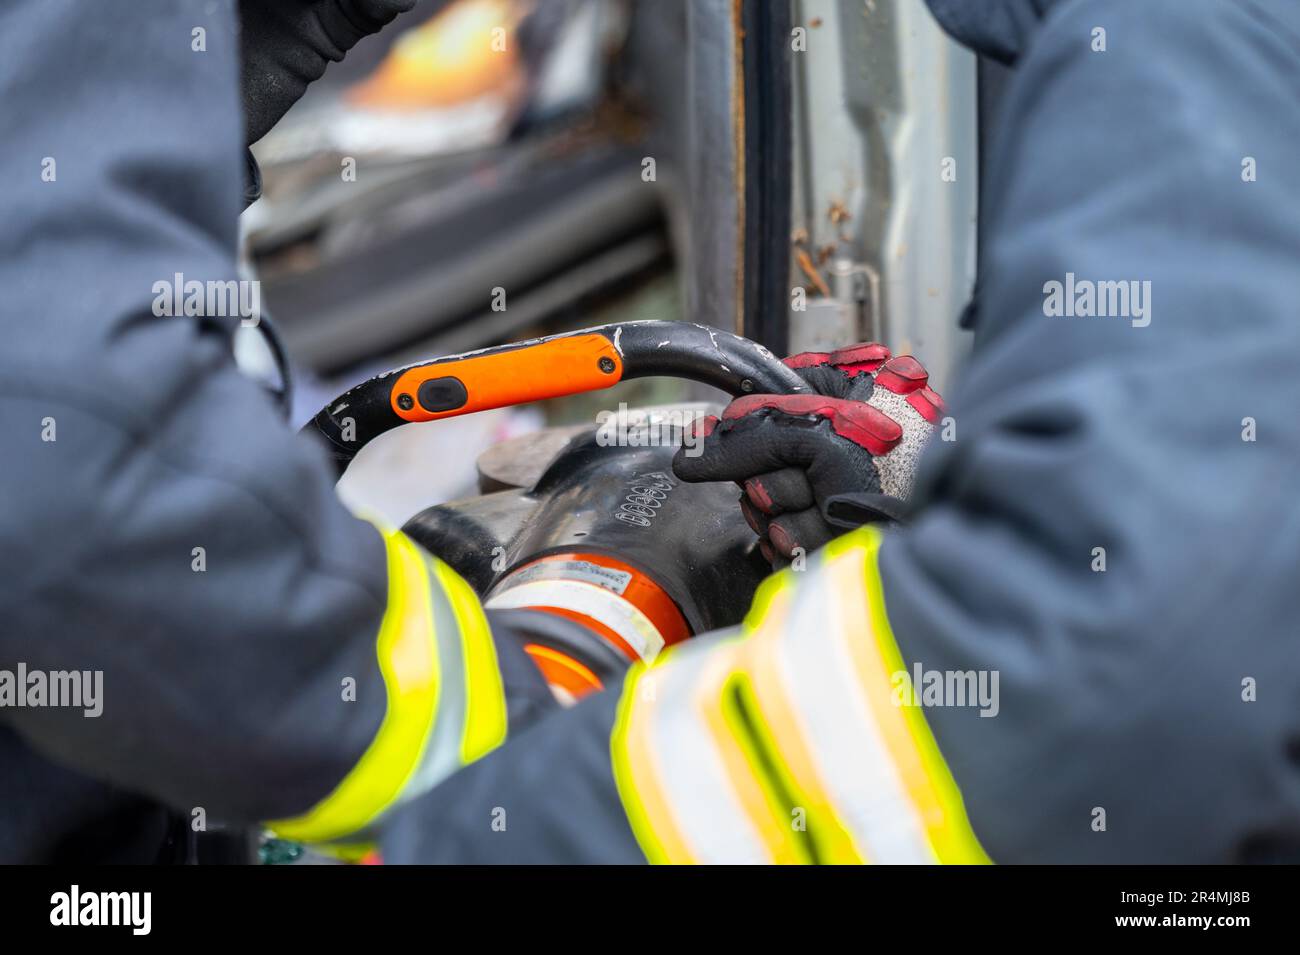 Firefighters using hydraulic tools during a rescue operation training. Rescuers unlock the passenger in car after accident. High quality photography. Stock Photo